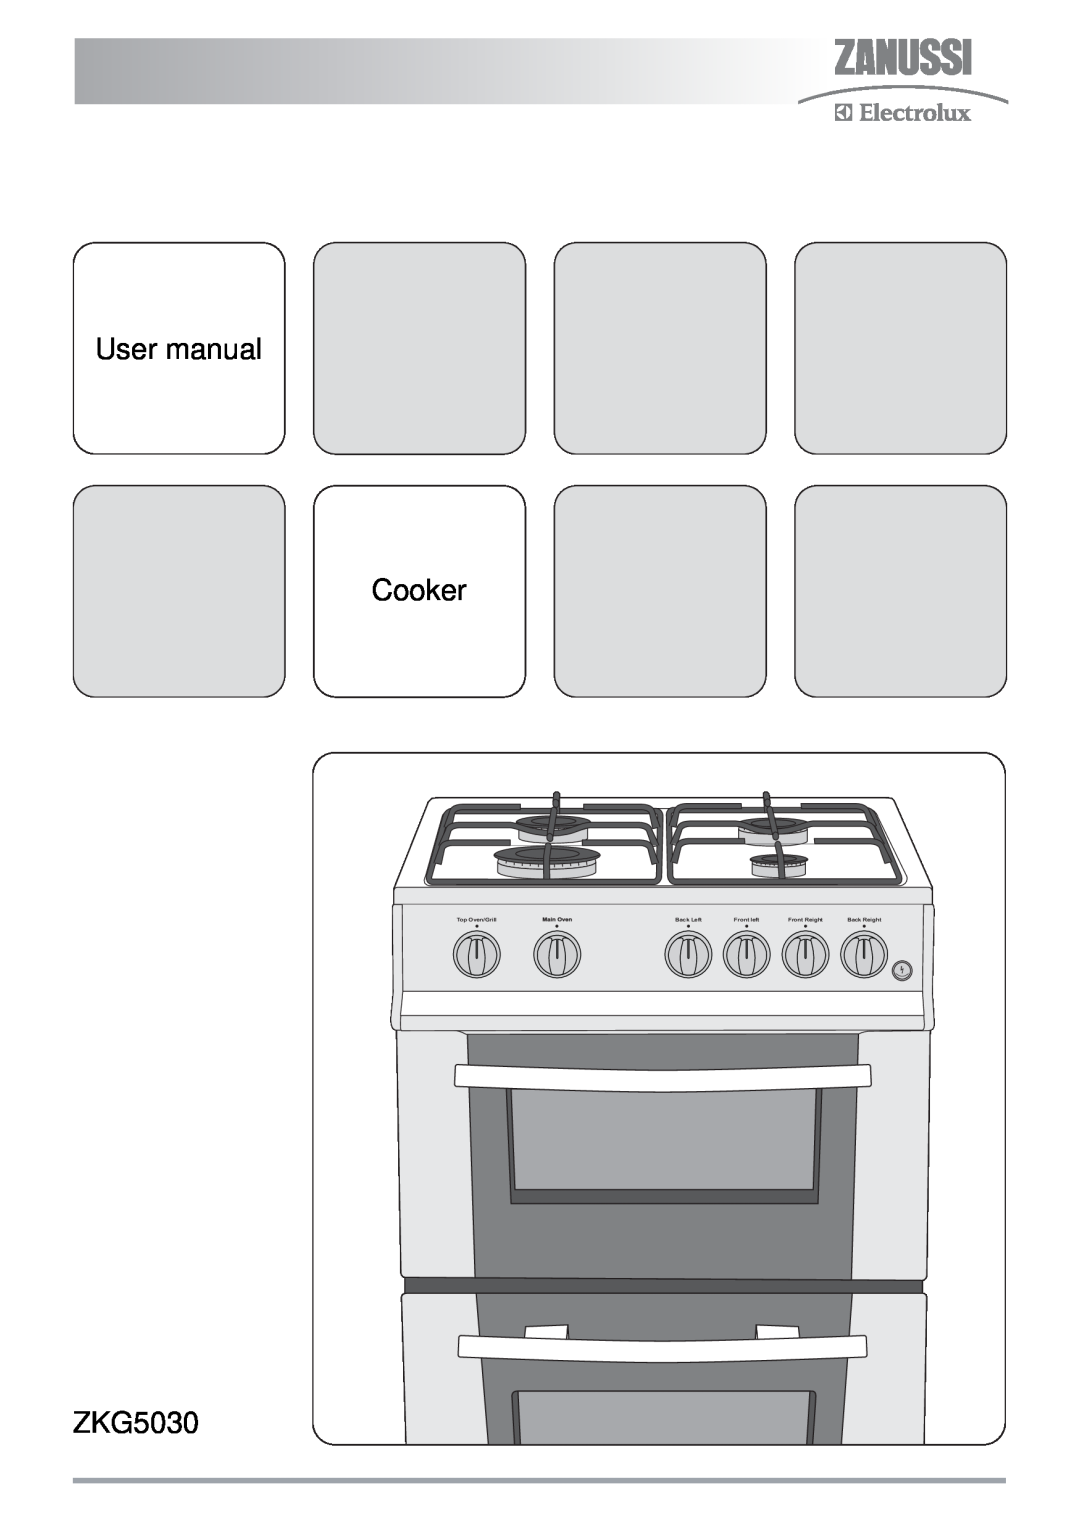 Zanussi ZKG5030 manual Top Oven/Grill, Back Left, Front left, Front Reight, Back Reight 